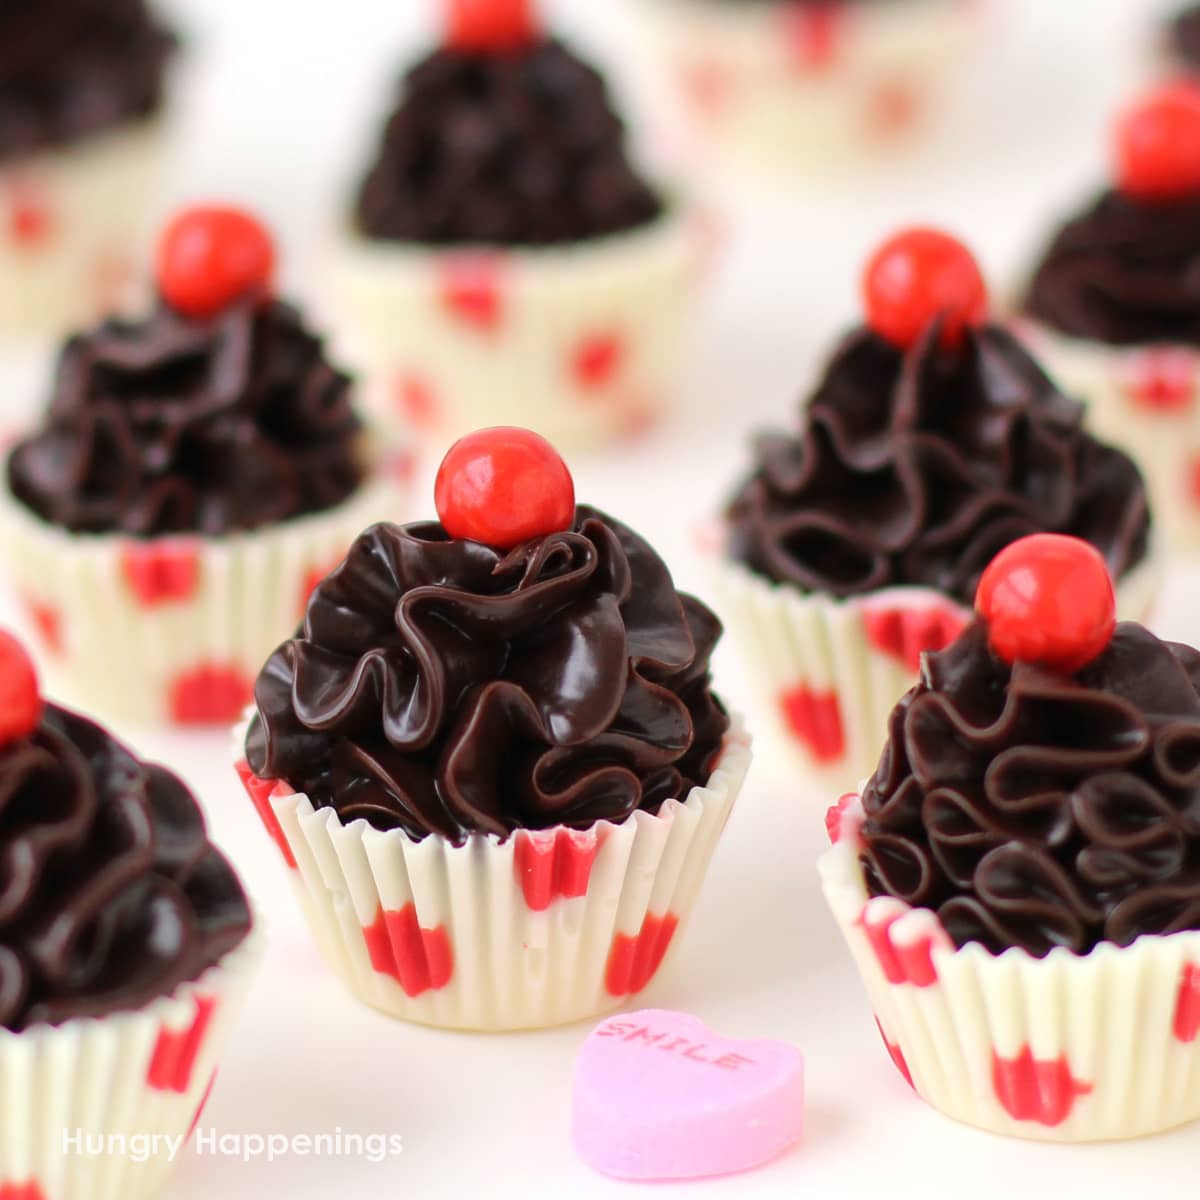 chocolate truffle cupcakes with red polka dot white chocolate cups filled with a swirl of chocolate ganache.